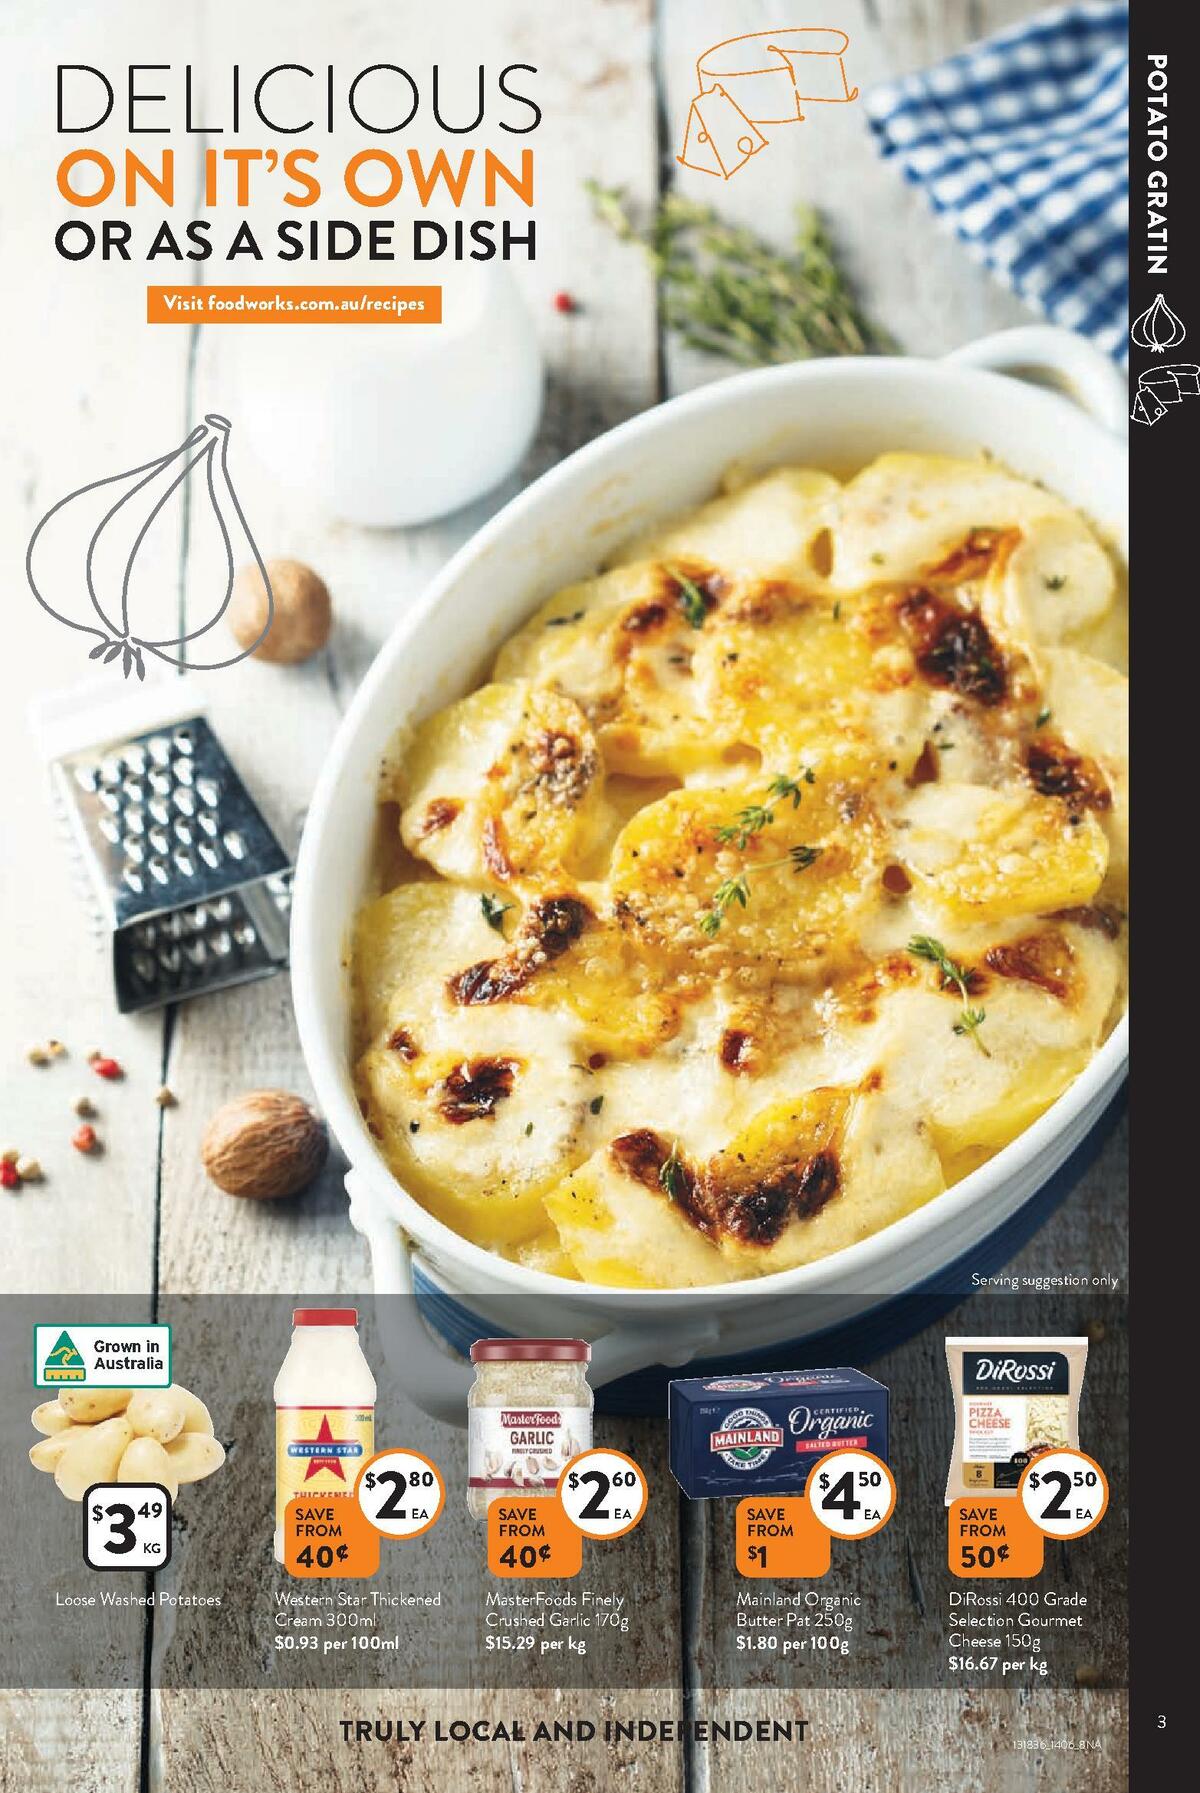 FoodWorks Catalogues from 14 June